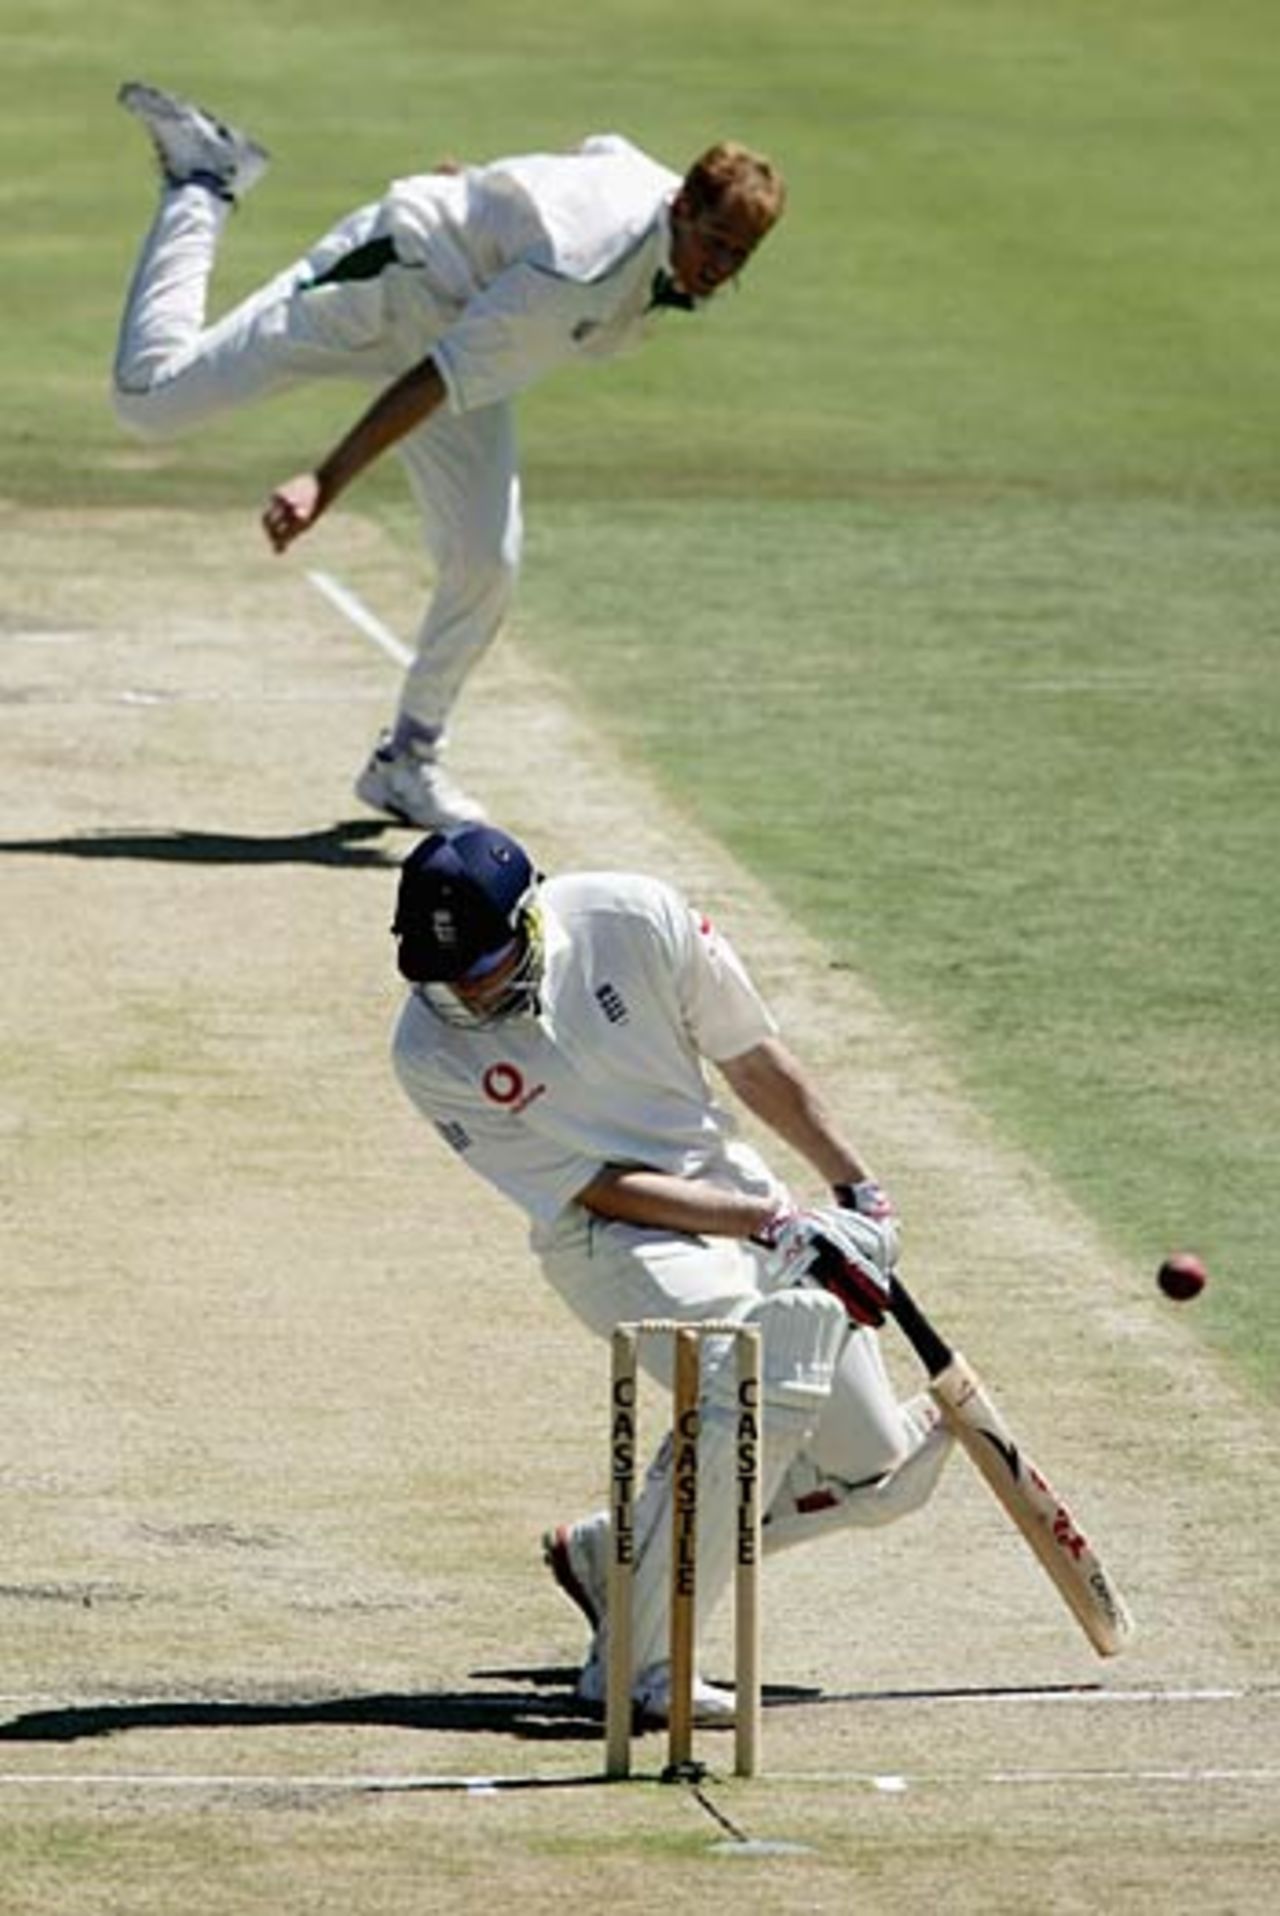 Andrew Flintoff ducks out of the way of a Shaun Pollock bouncer, South Africa v England, 5th Test, Centurion, January 24, 2005